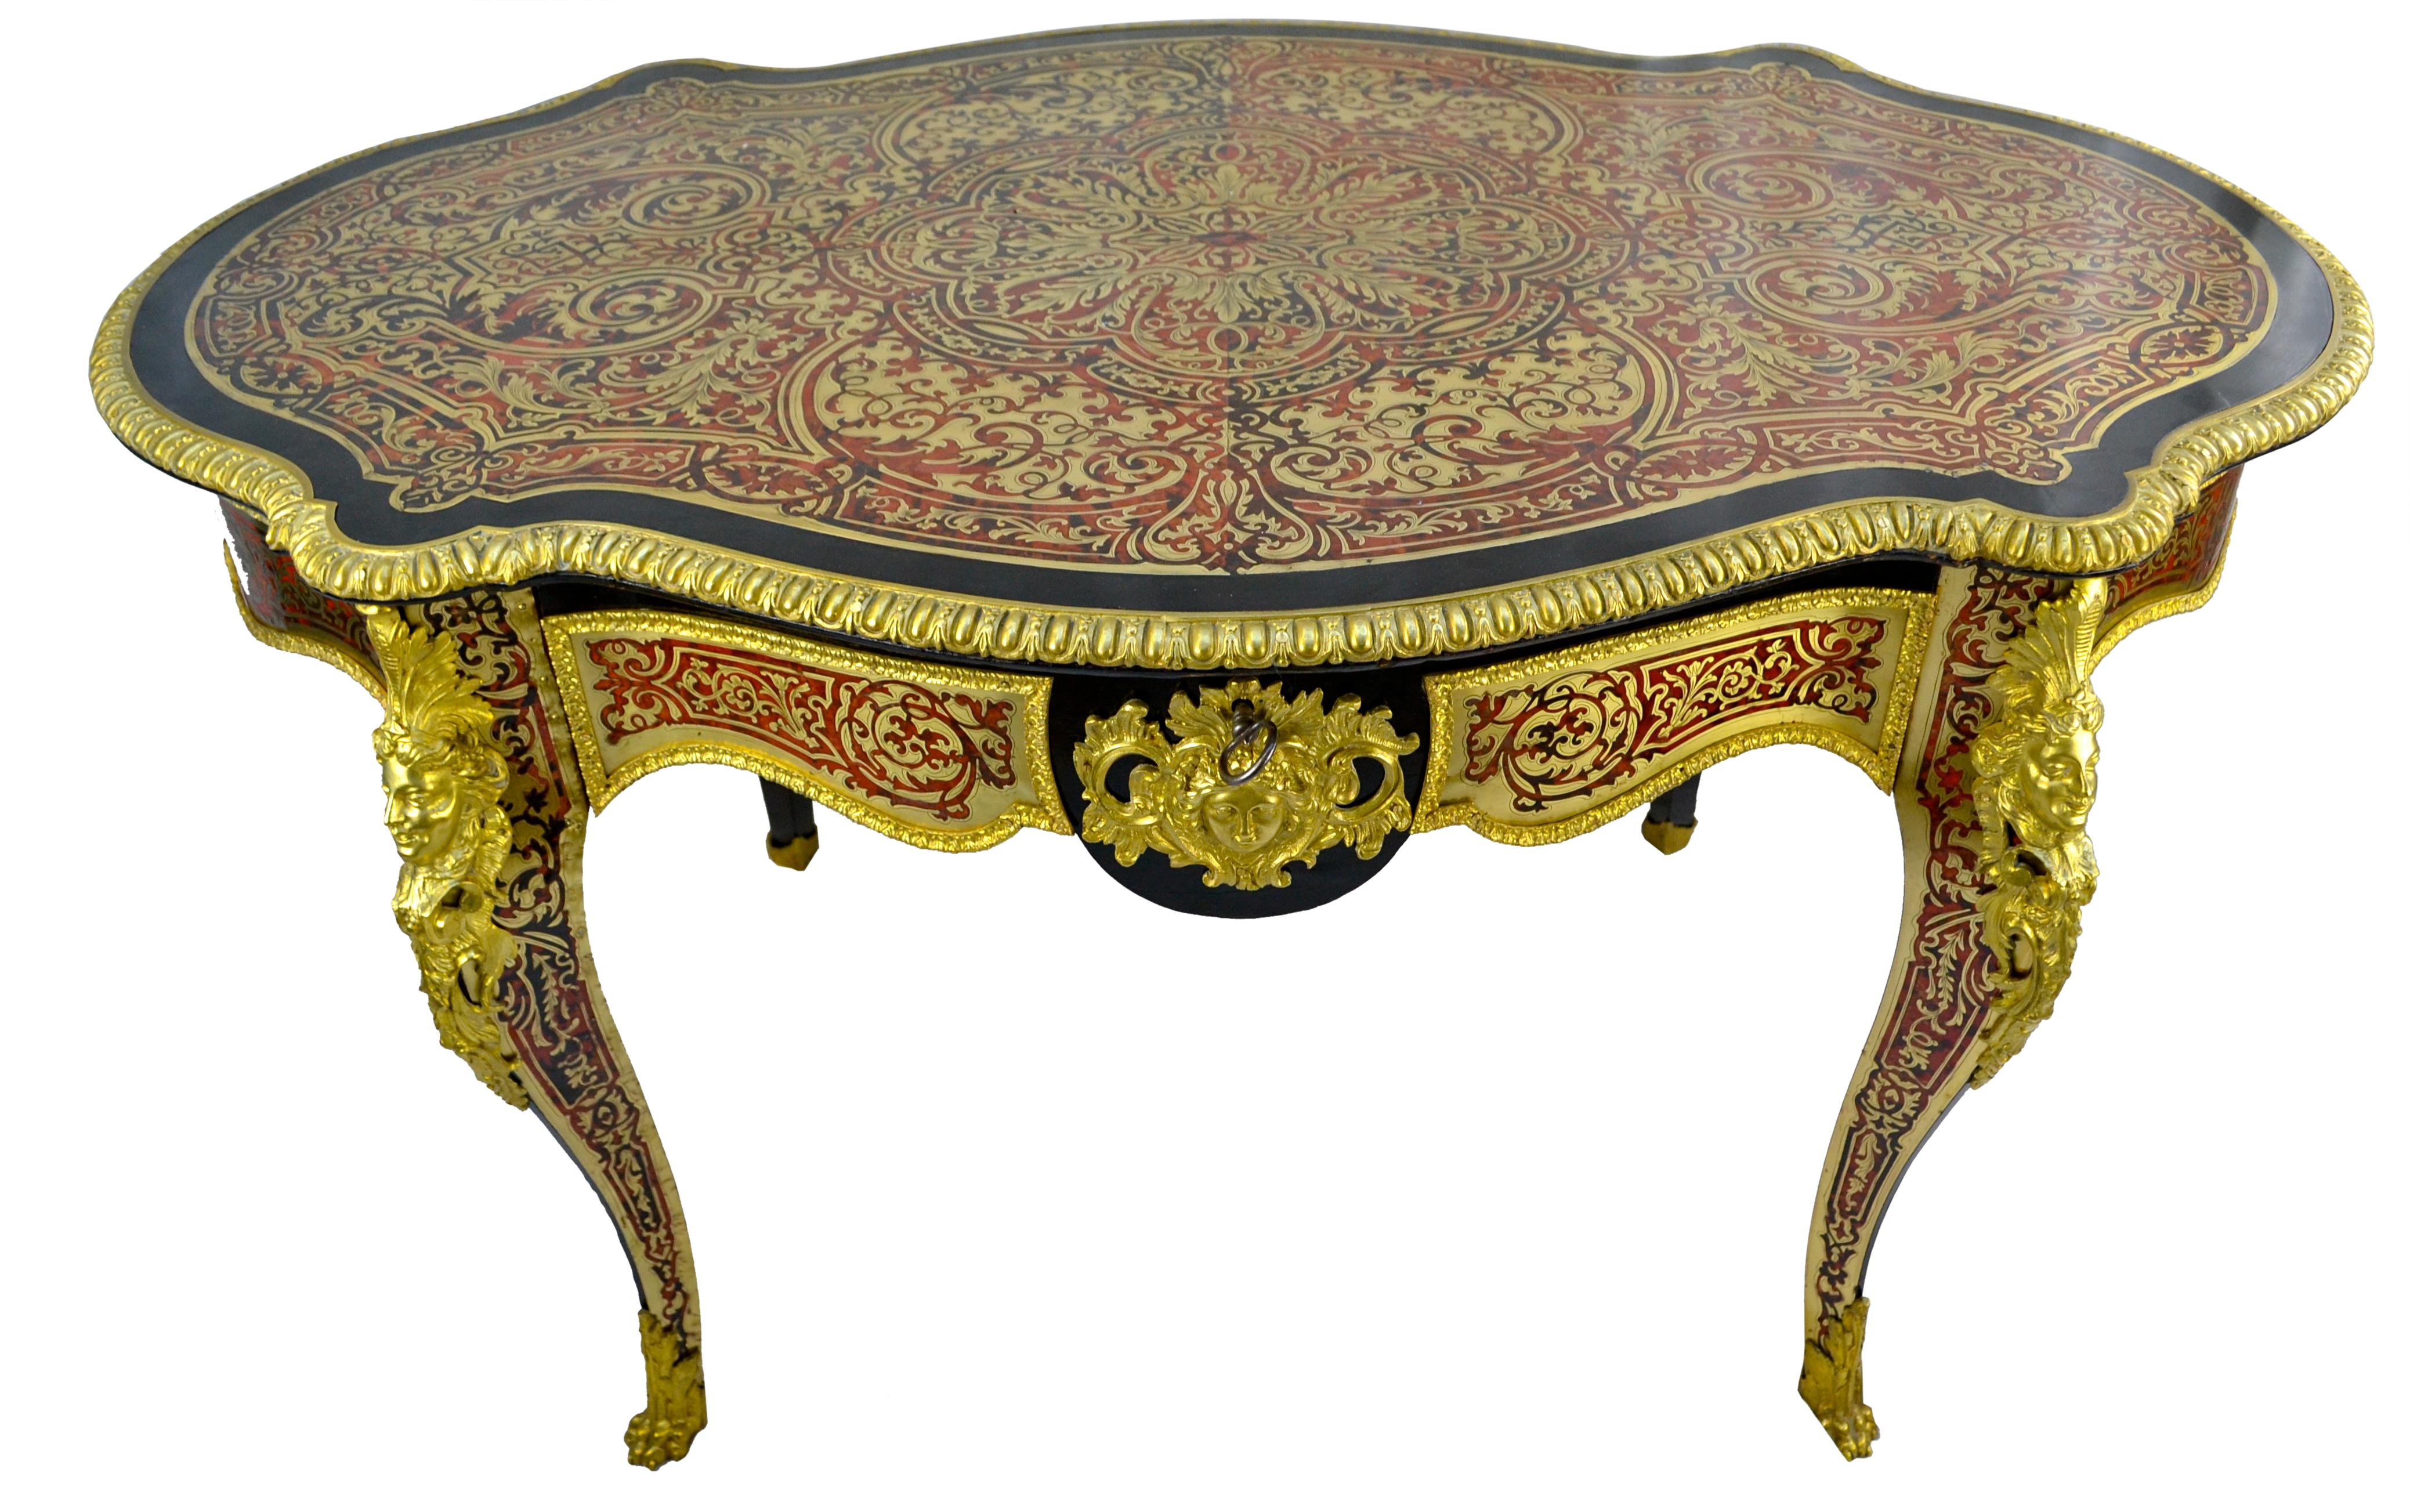 A fine Napoleon III French kidney shaped centre table and desk with overall Boulle work to the oak carcass (tortoiseshell and brass inlay); having a finely chased gilded bronze top border, and gilded bronze mounts to the apron and legs. The shaped